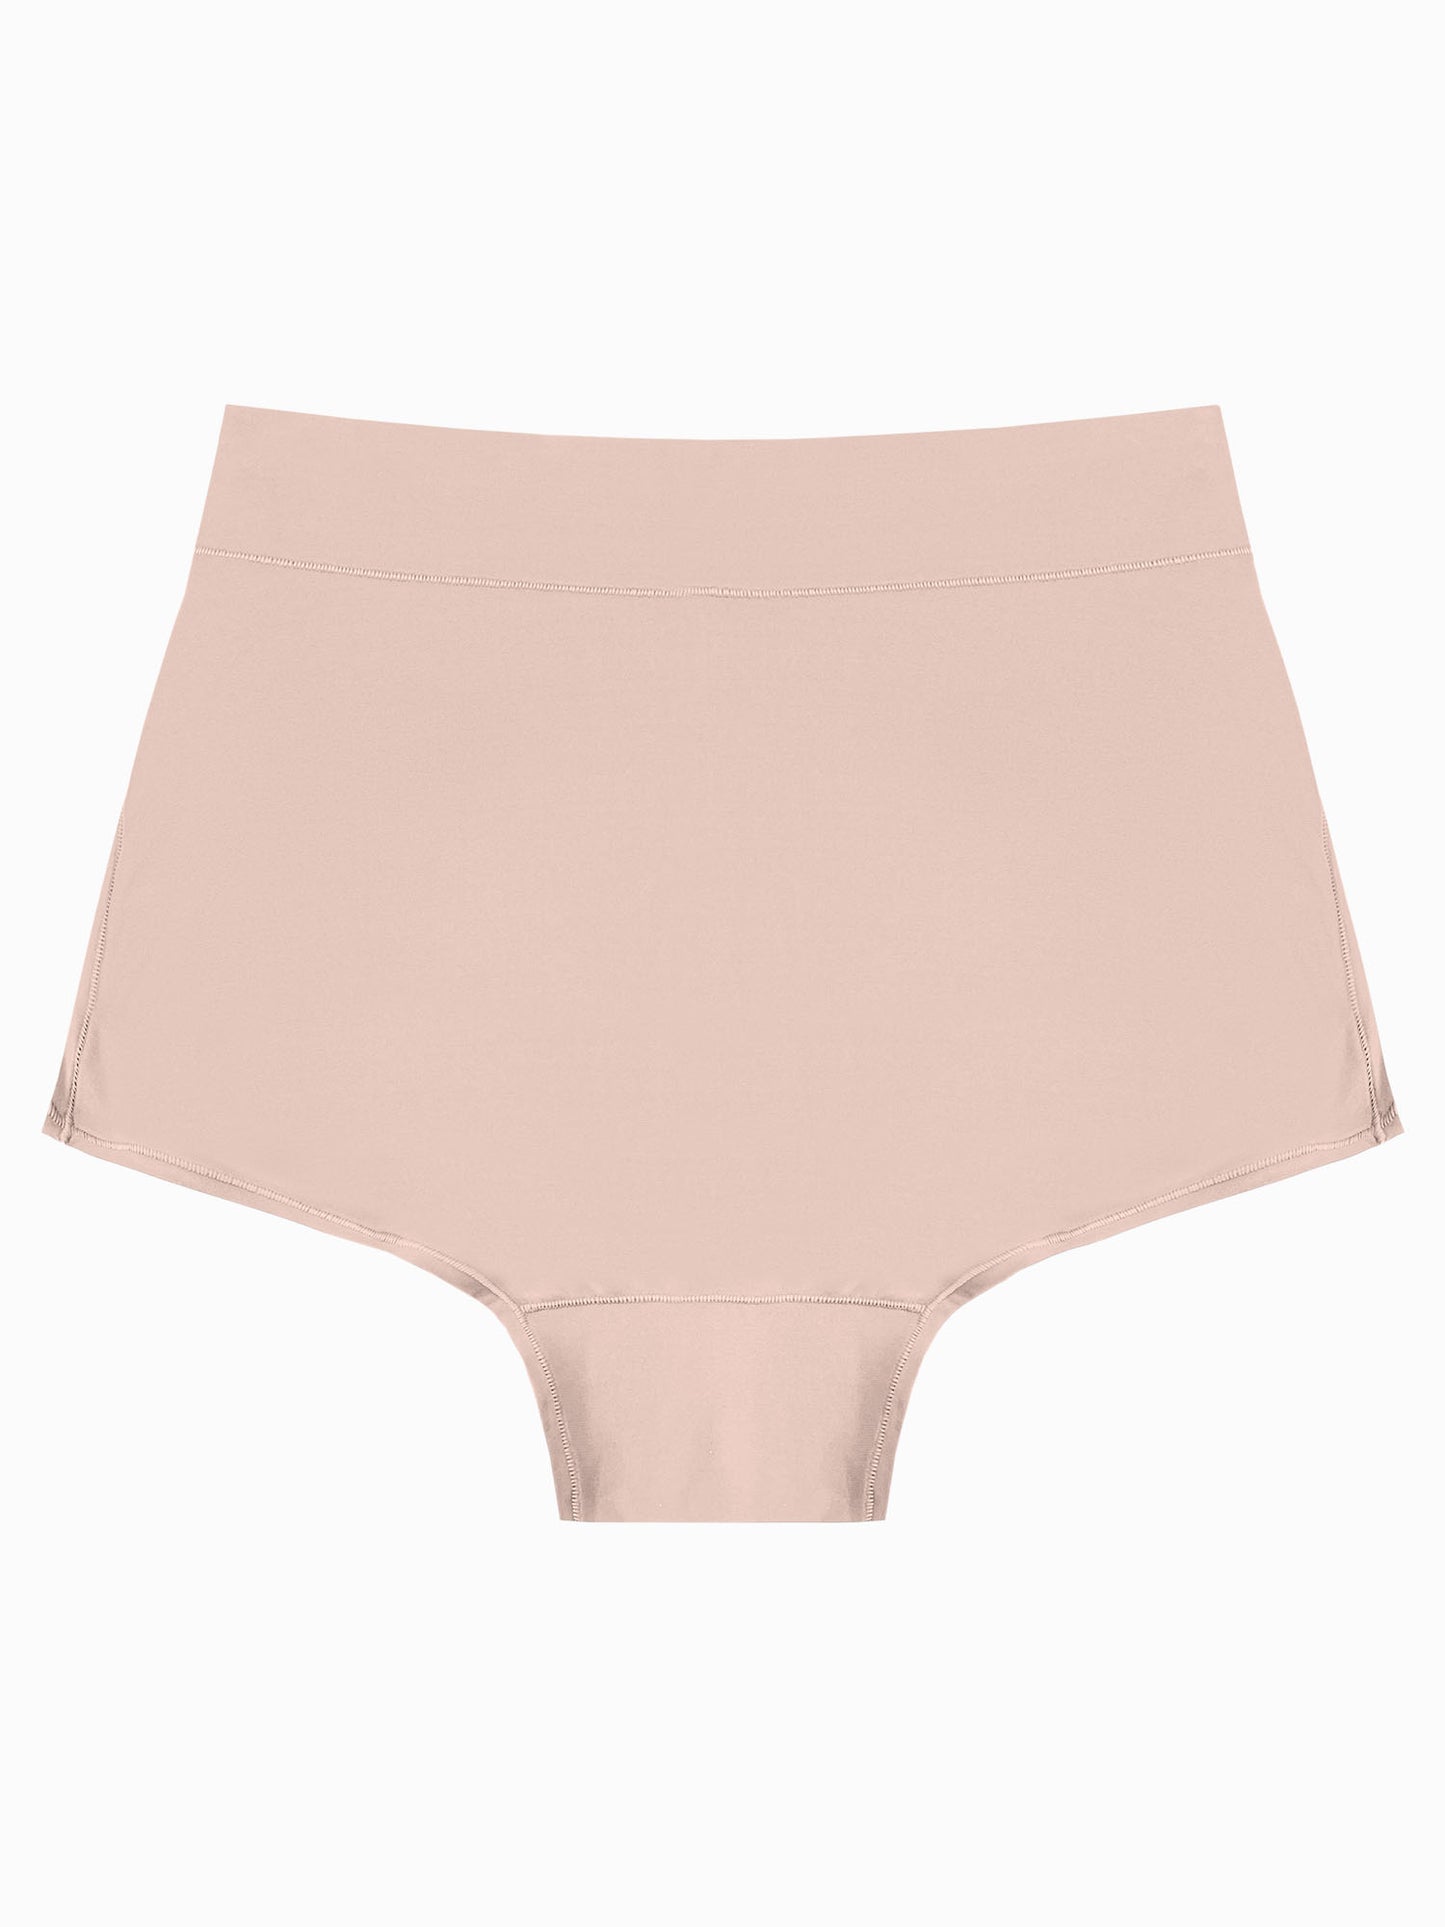 Product image of the Grow with Me™ Maternity & Postpartum Boyshort in Soft Pink